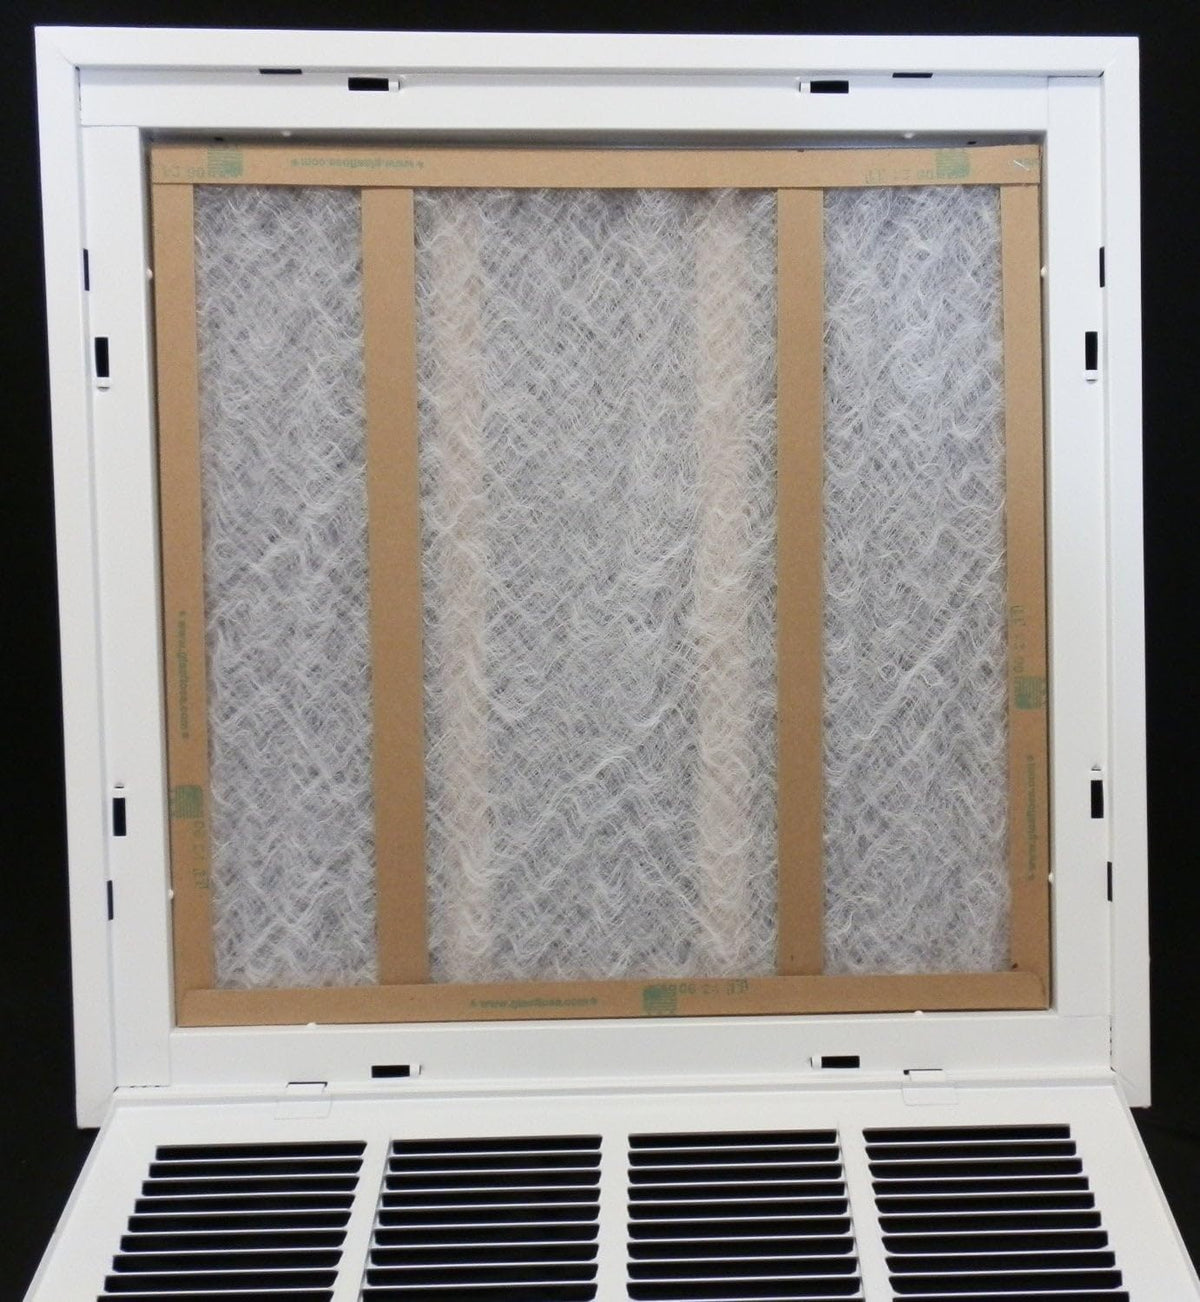 12&quot; X 20&quot; Steel Return Air Filter Grille for 1&quot; Filter - Removable Frame - * Filter Included * [Outer Dimensions: 14 5/8&quot; X 22 5/8&quot;]